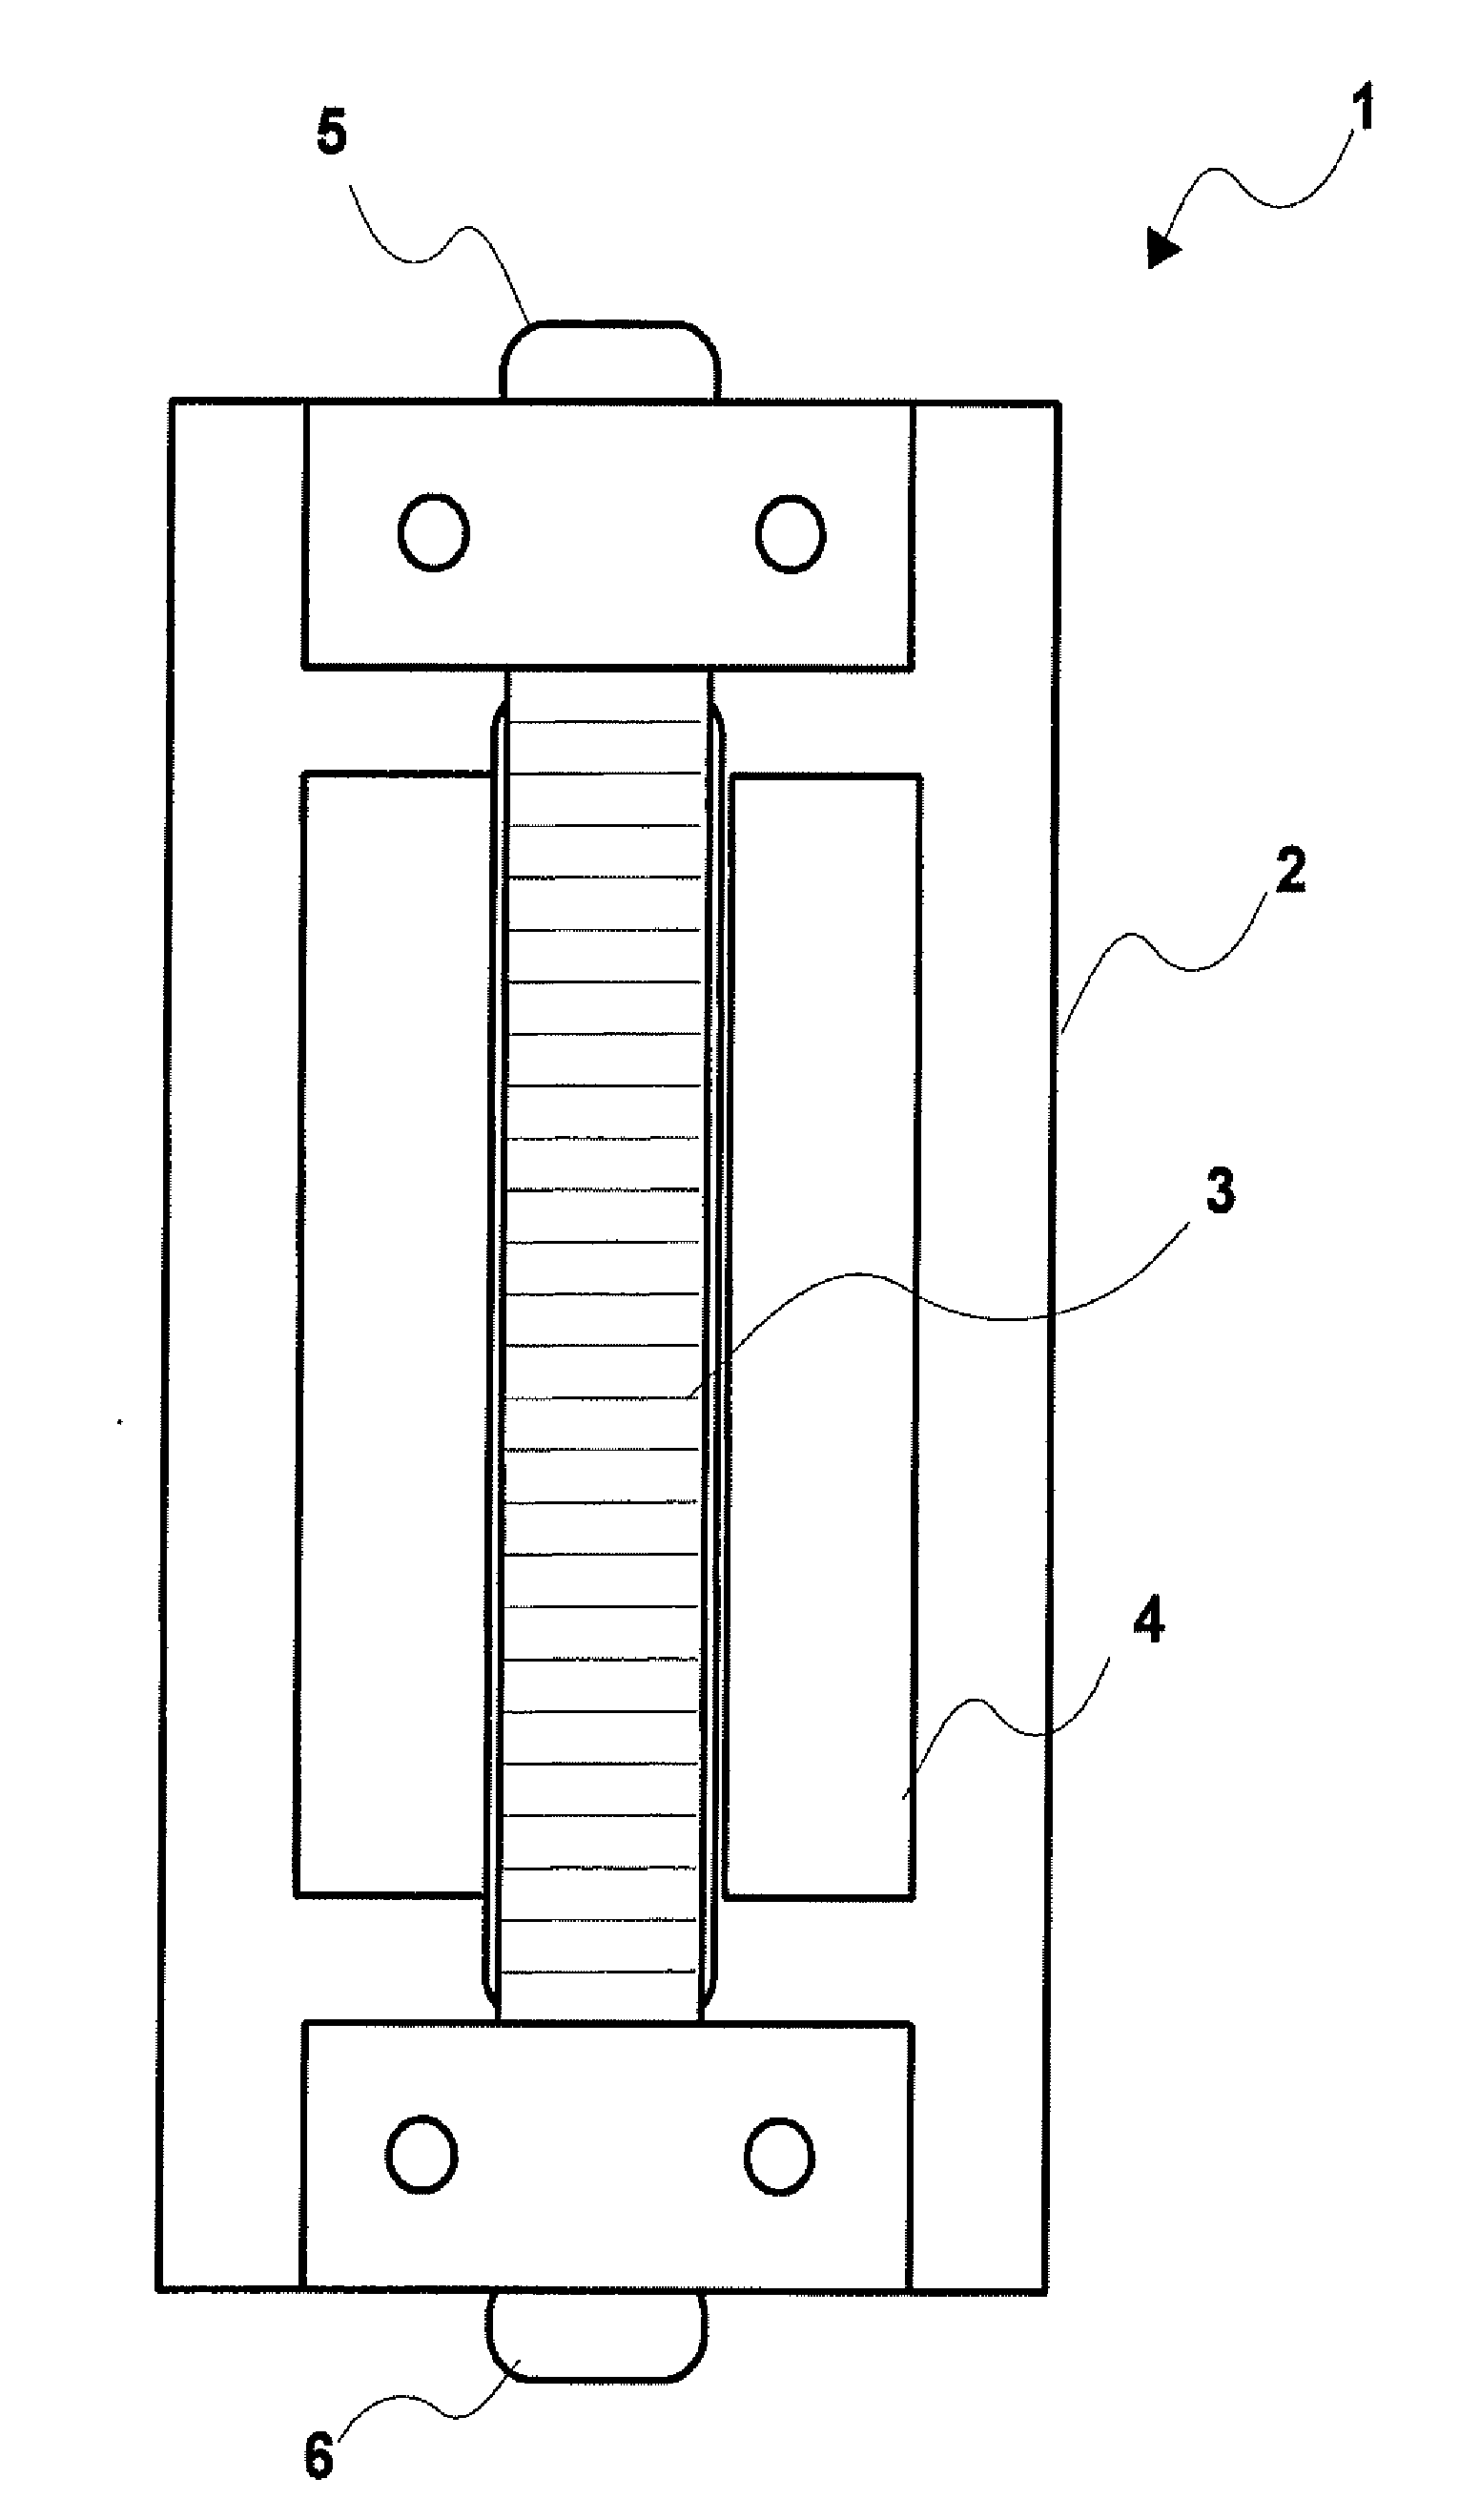 Ribbon Microphone Unit and Ribbon Microphone